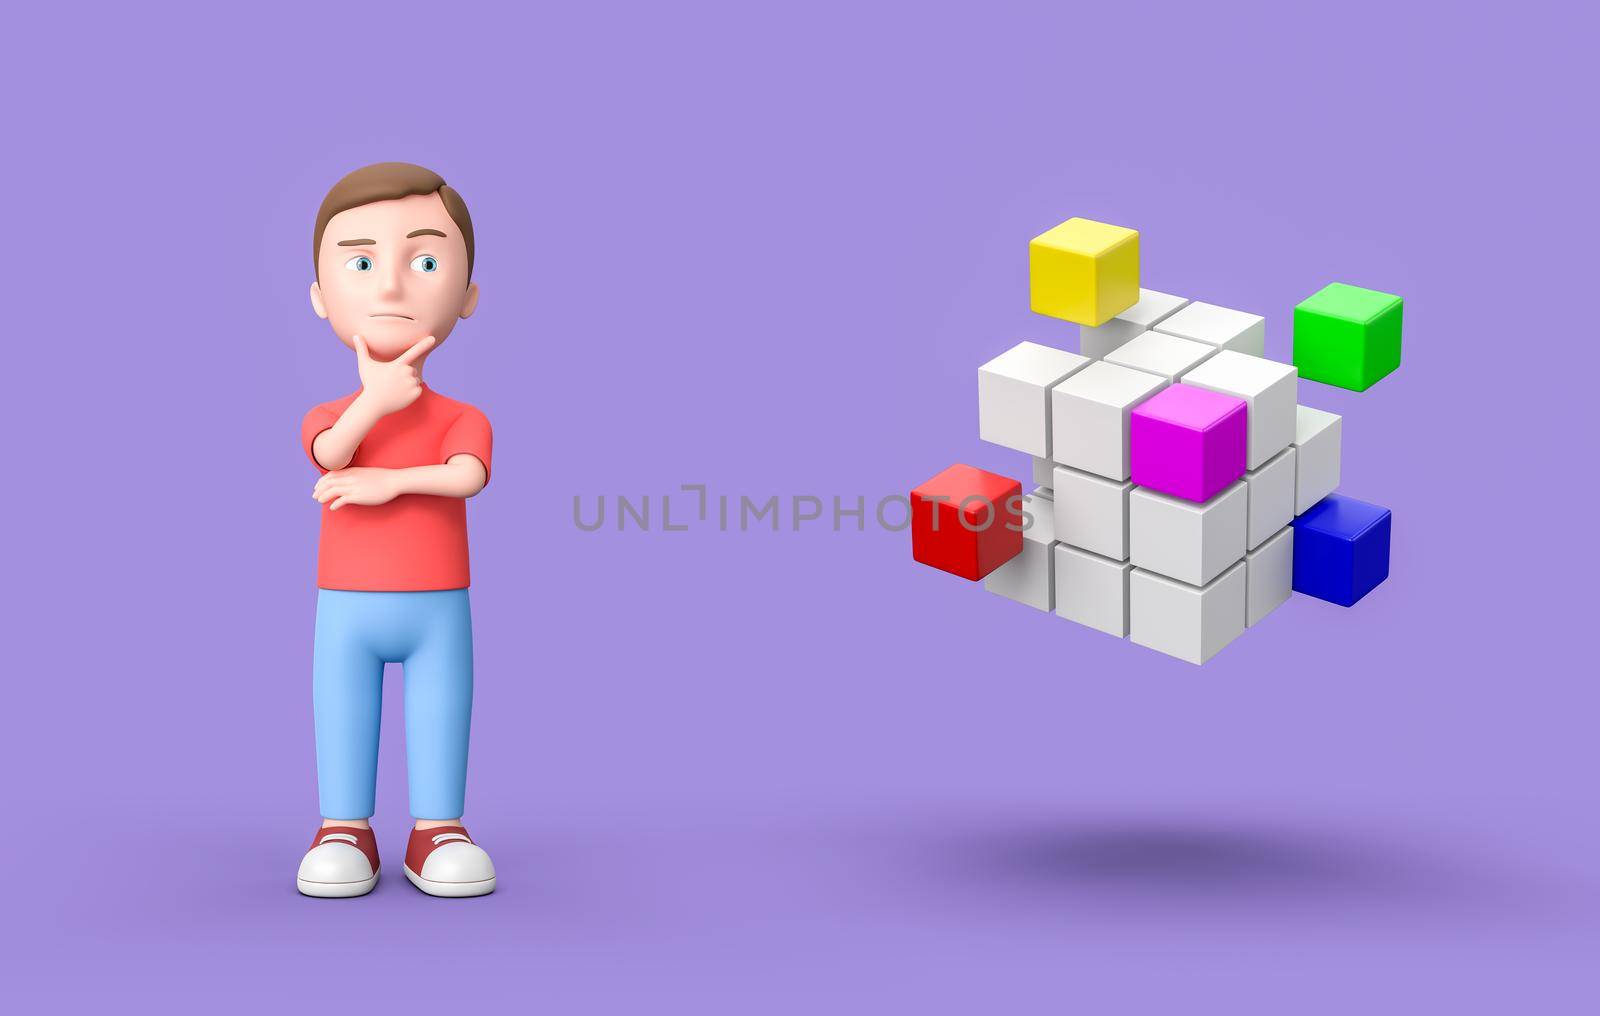 Young 3D Cartoon Character and Combining Cubes on Purple Background by make